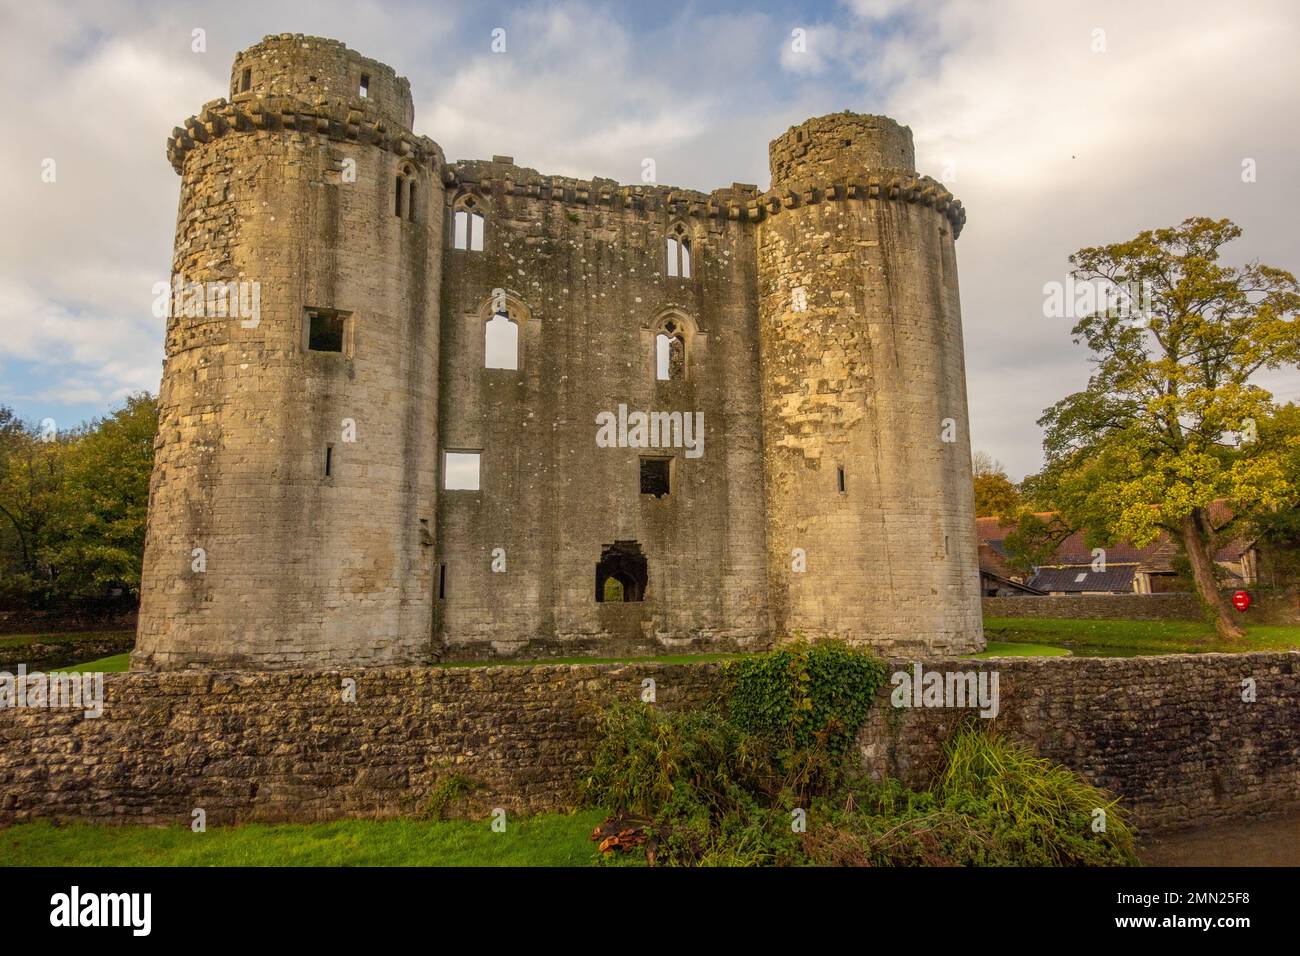 Looking up at the ruined towers of Nunney Castle Wiltshire. Stock Photo